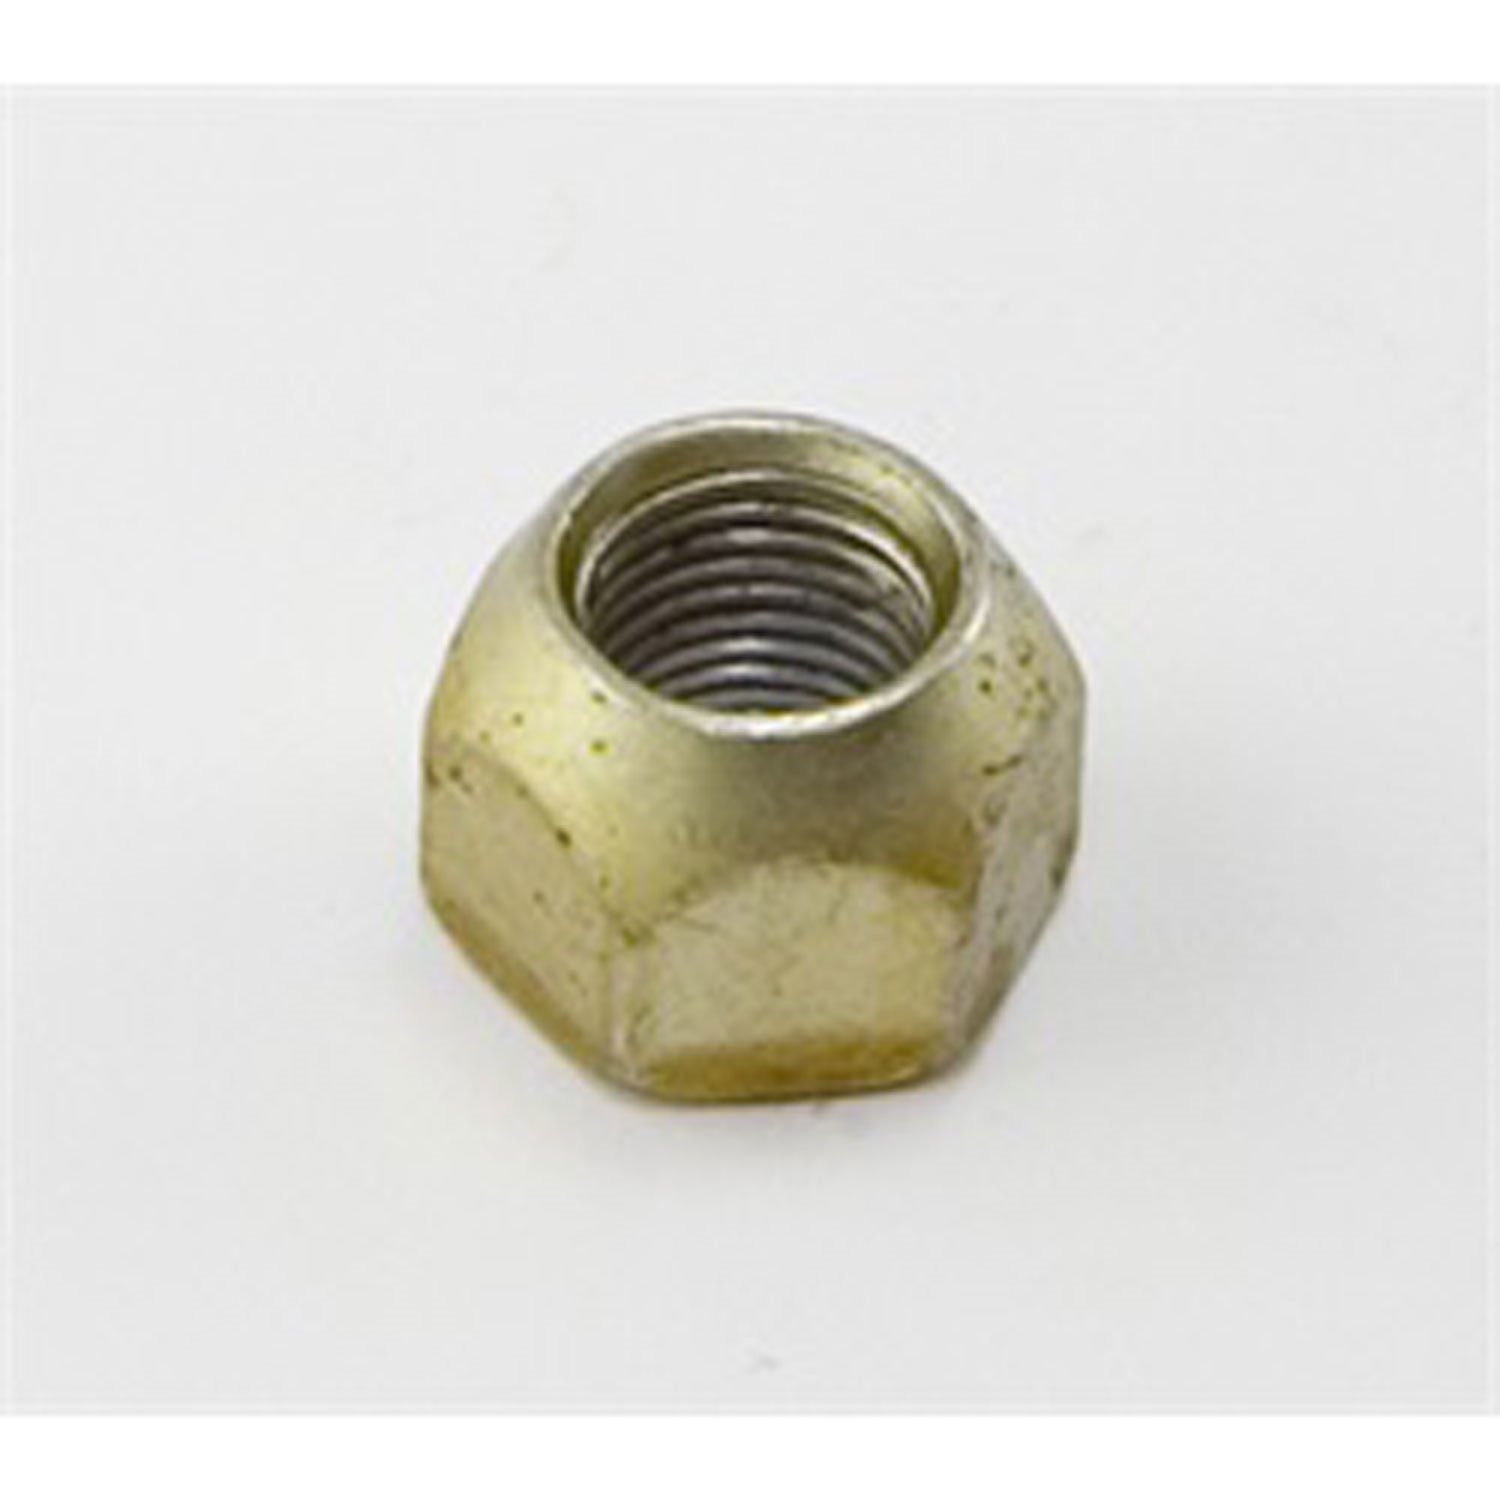 Replacement lug nut from Omix-ADA, Fits front or rear axles and has left hand threads., Fits 41-4